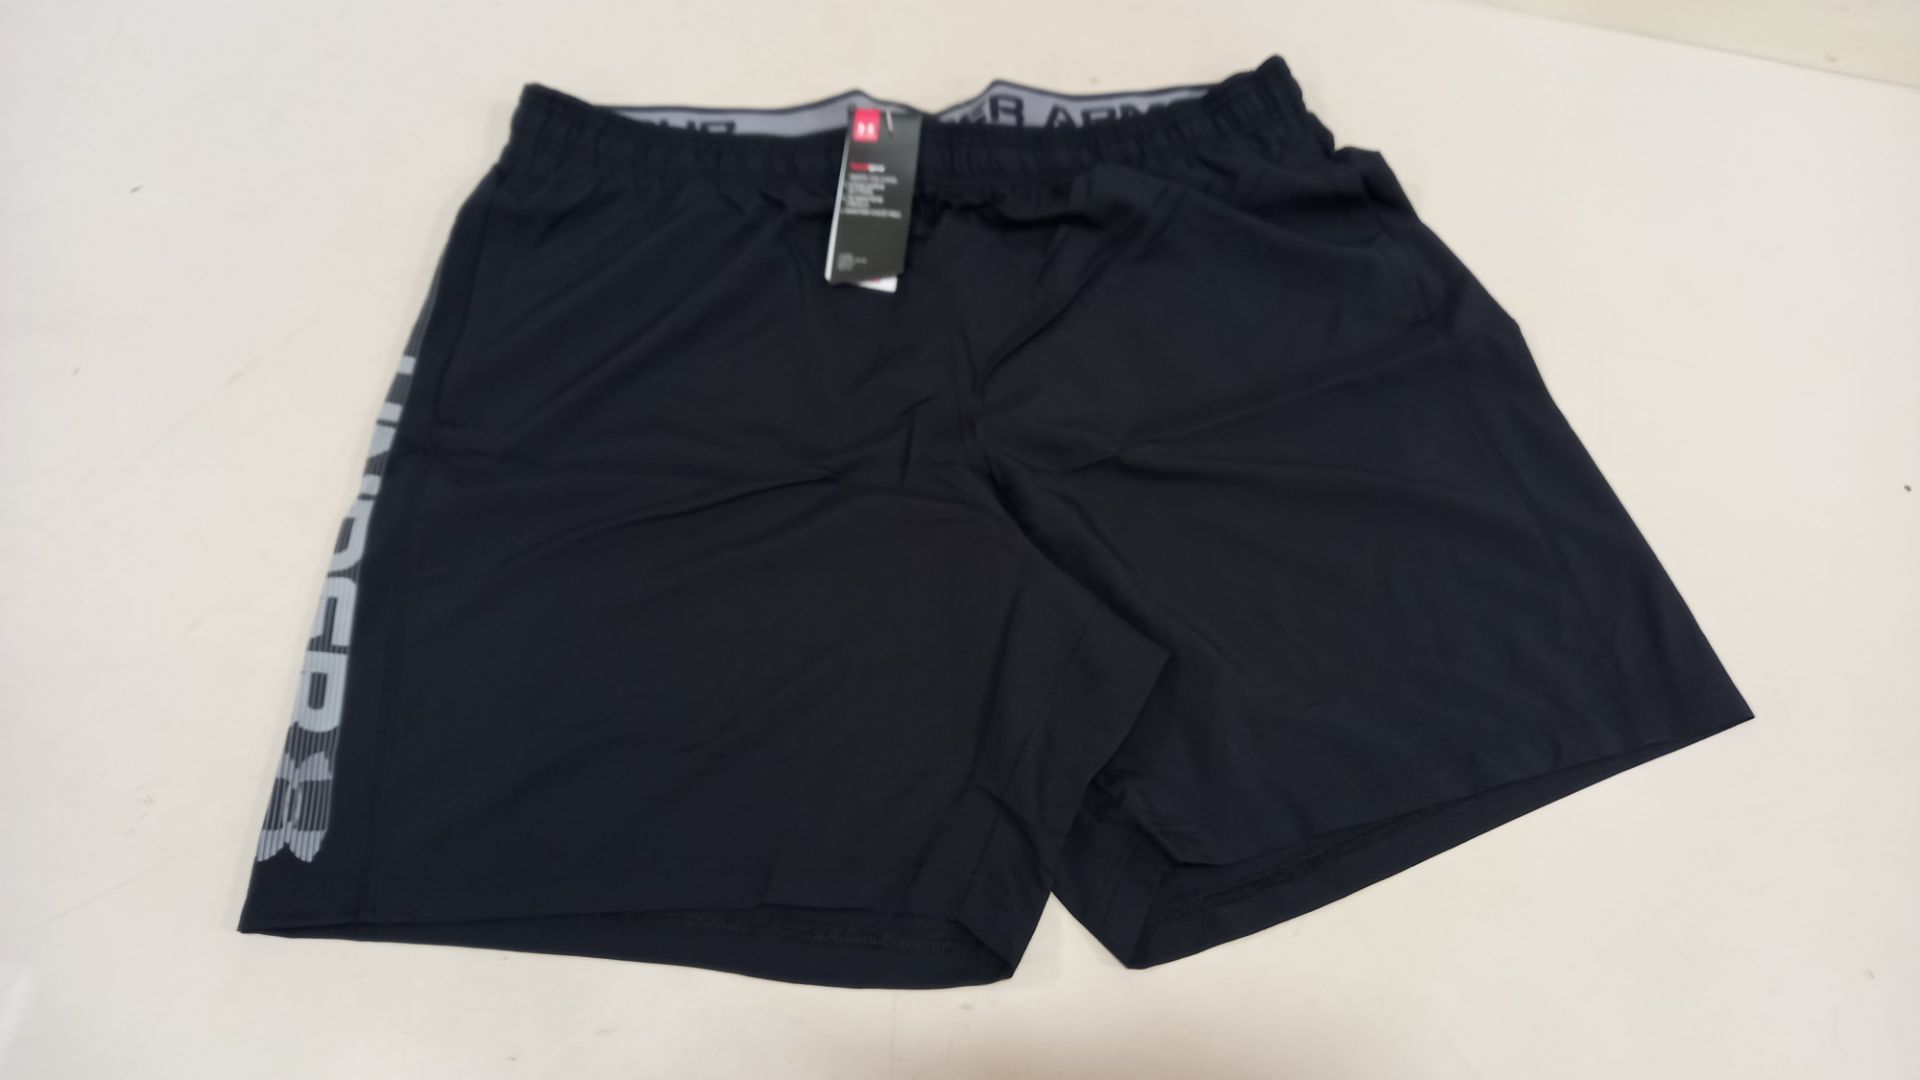 15 X BRAND NEW UNDER ARMOUR WOVEN GRAPH SHORTS - SIZE XX LARGE RRP £19.99